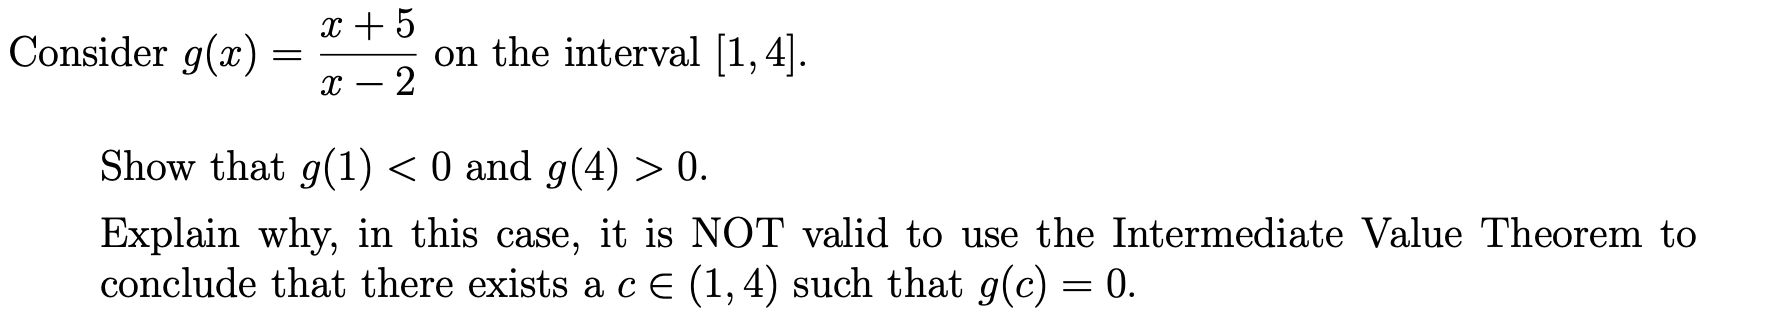 x + 5
Consider g(x) :
on the interval [1,4].
Show that g(1) < 0 and g(4) > 0.
Explain why, in this case, it is NOT valid to use the Intermediate Value Theorem to
conclude that there exists a cE (1,4) such that g(c) = 0.
